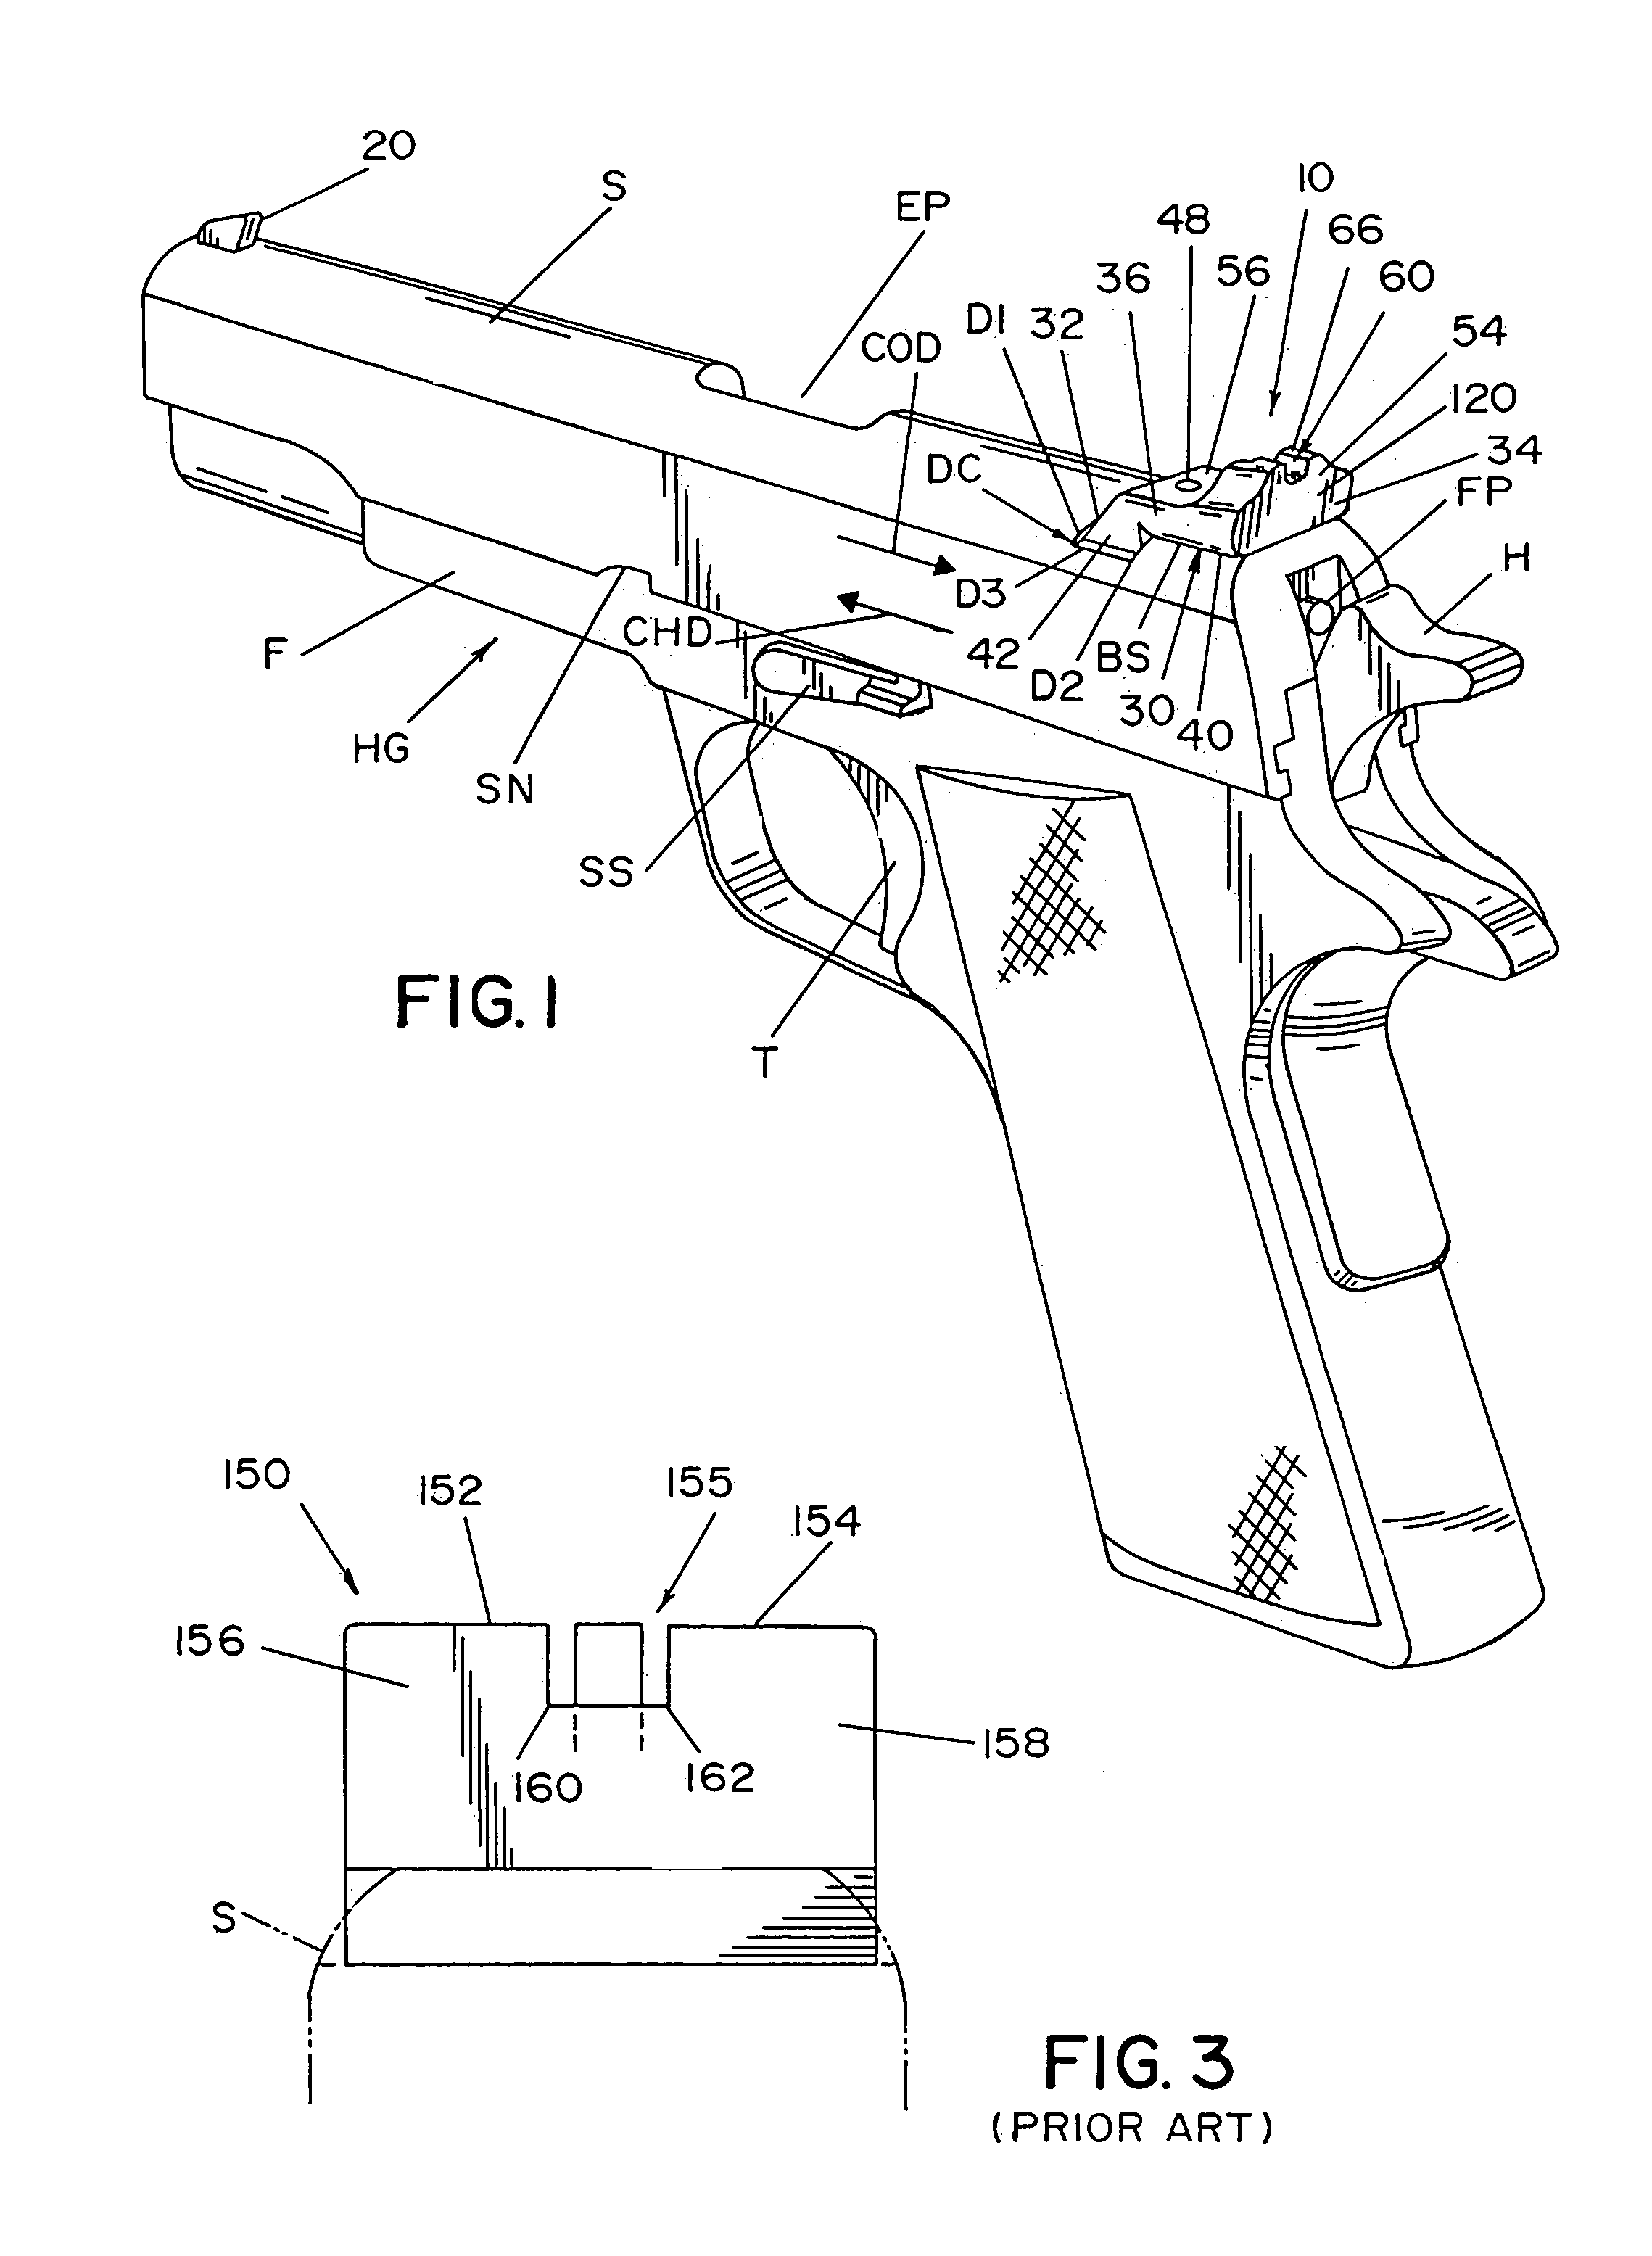 Tactical sight for a semi-automatic hand gun